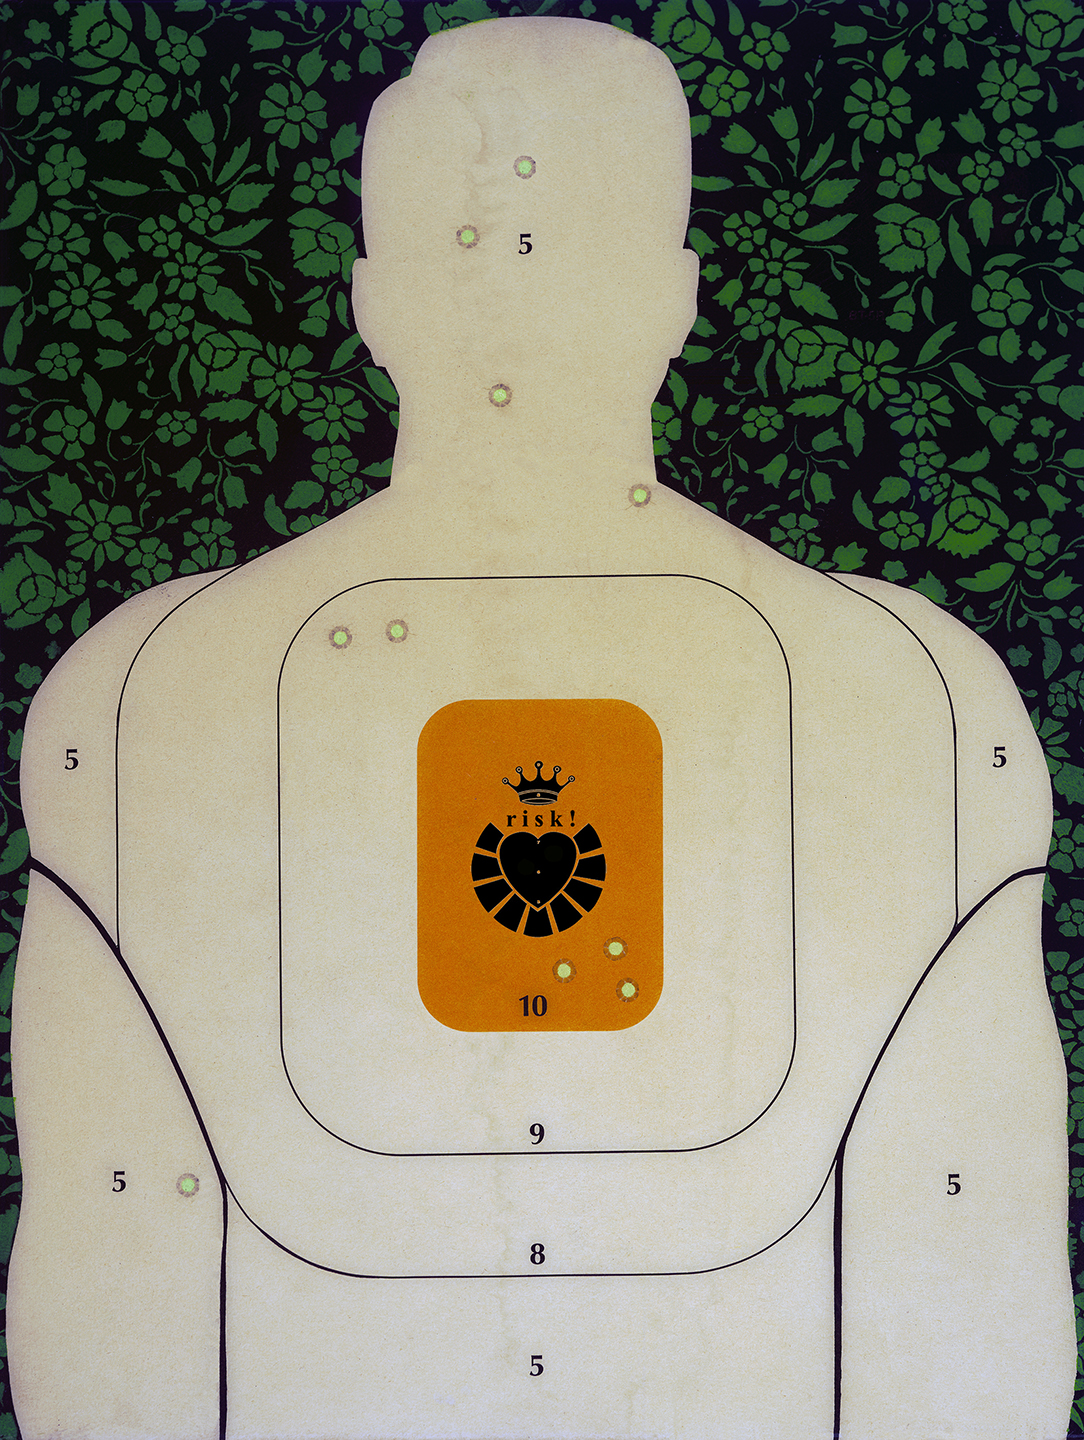 Special Edition Heart & Crown Training Target / 67 x 50 / Original Sold 